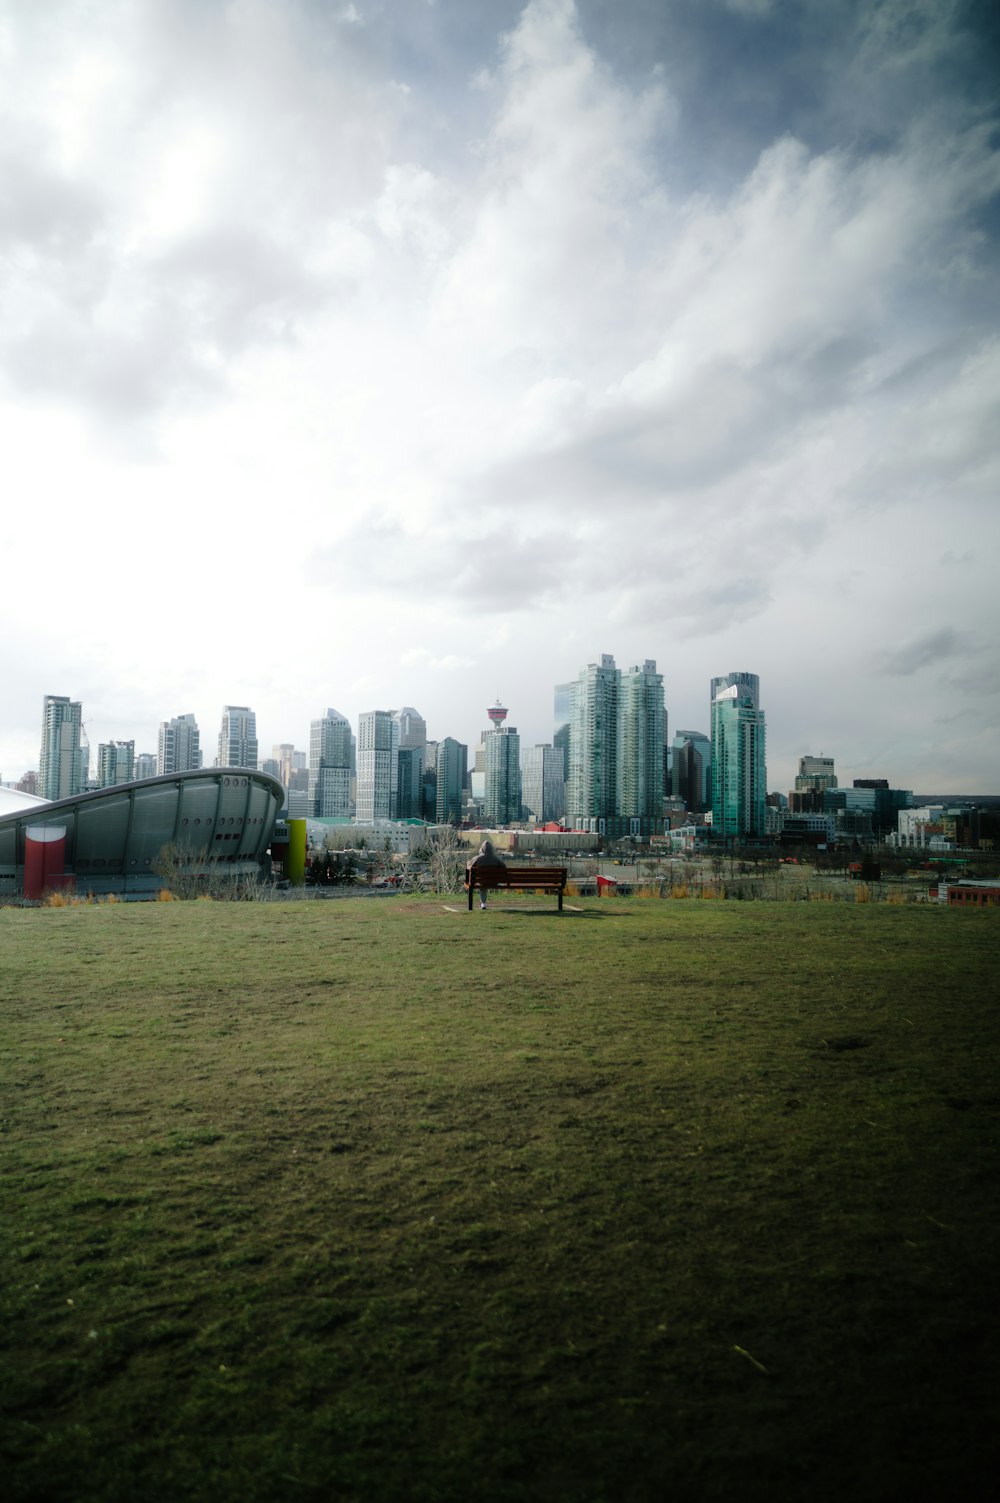 a horse in a field with a city in the background